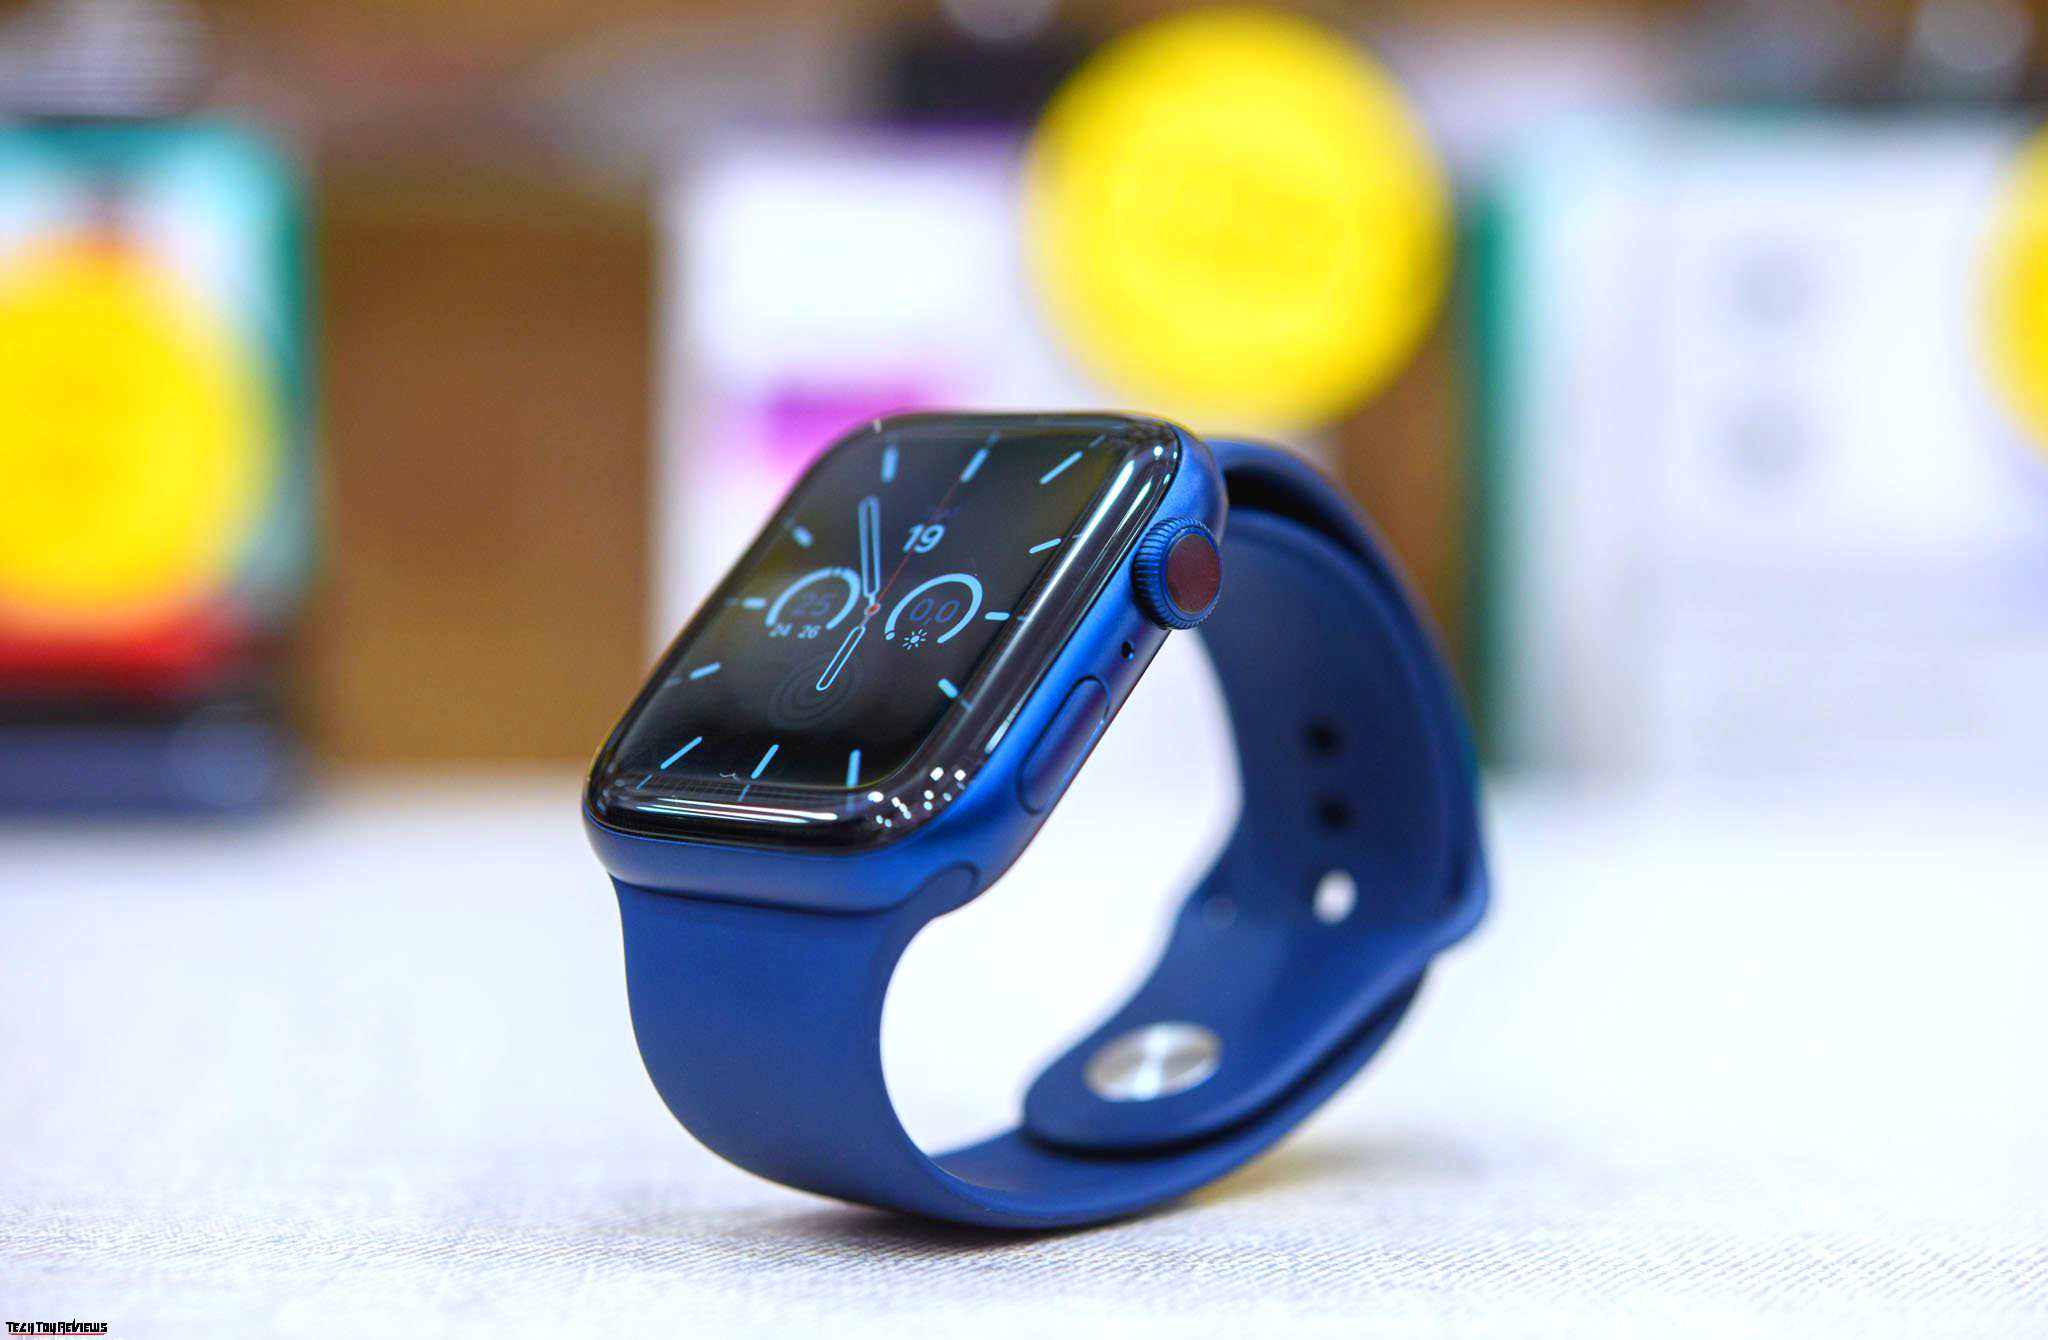 Series 6 Apple Watch Blue Aluminum: First Impression, Hands-On